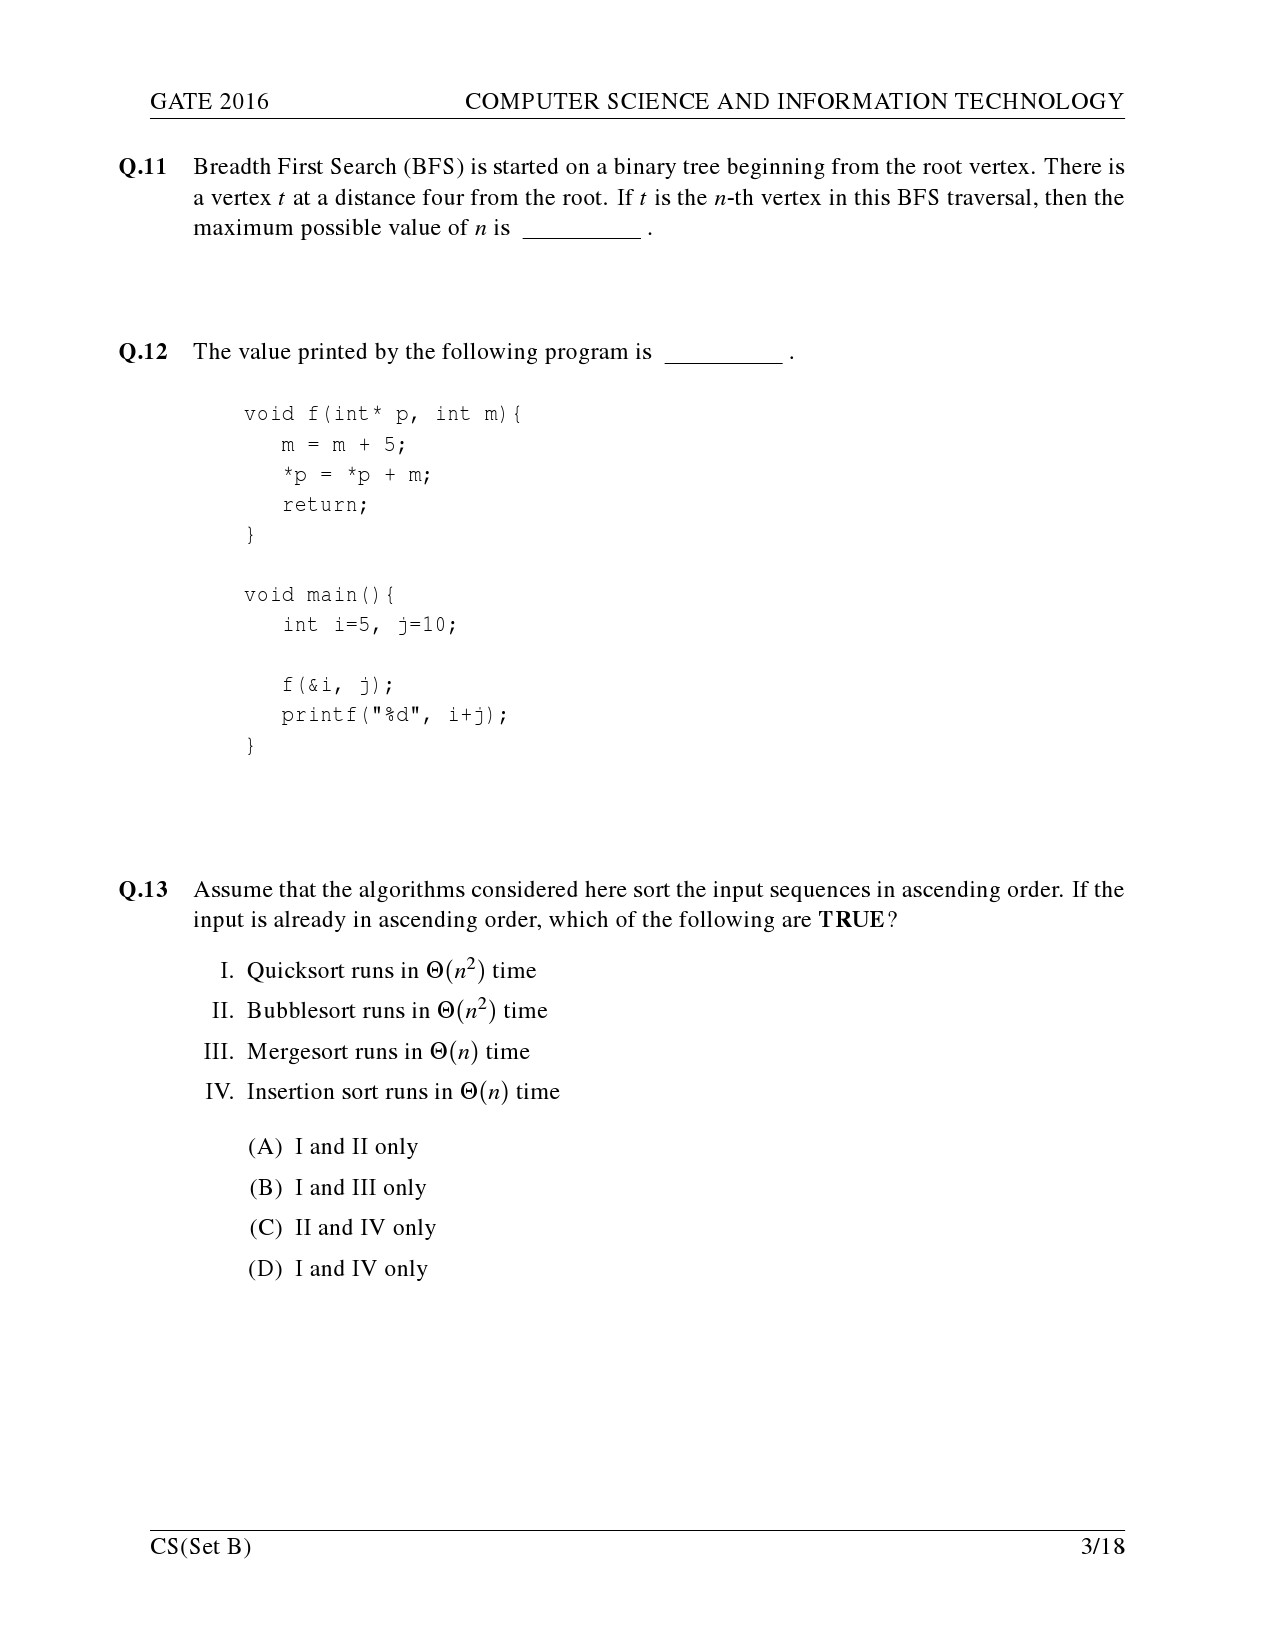 GATE Exam Question Paper 2016 Computer Science and Information Technology Set B 6